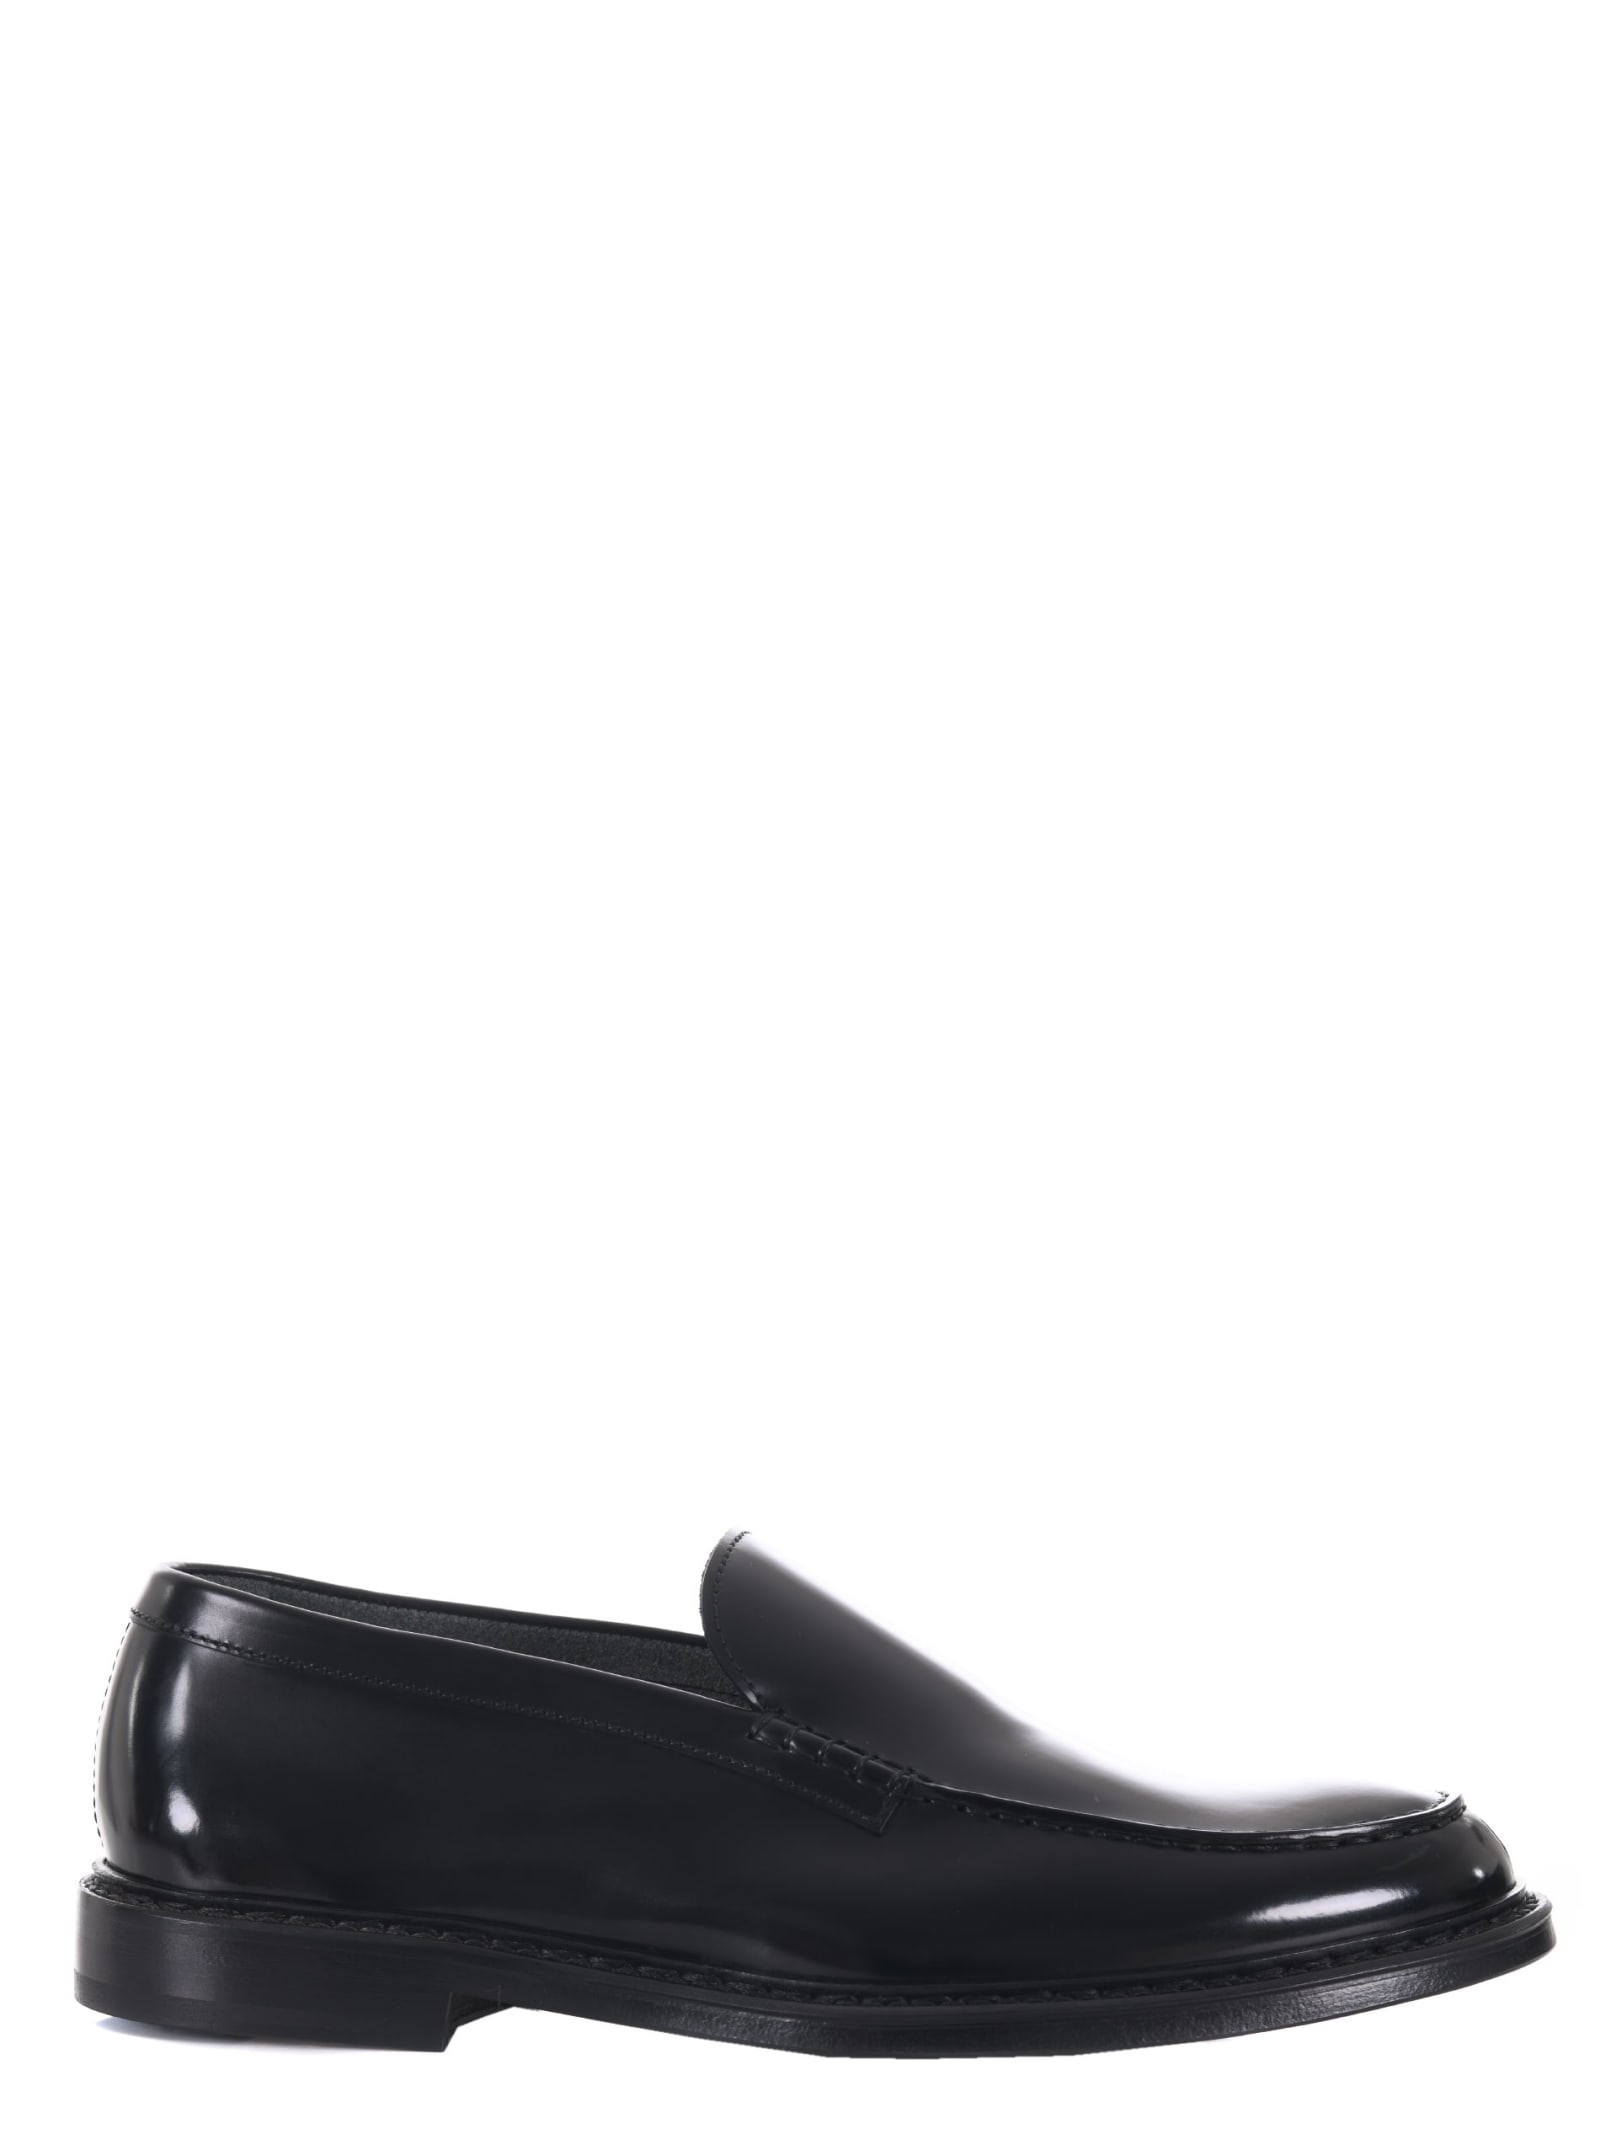 Doucals Loafers